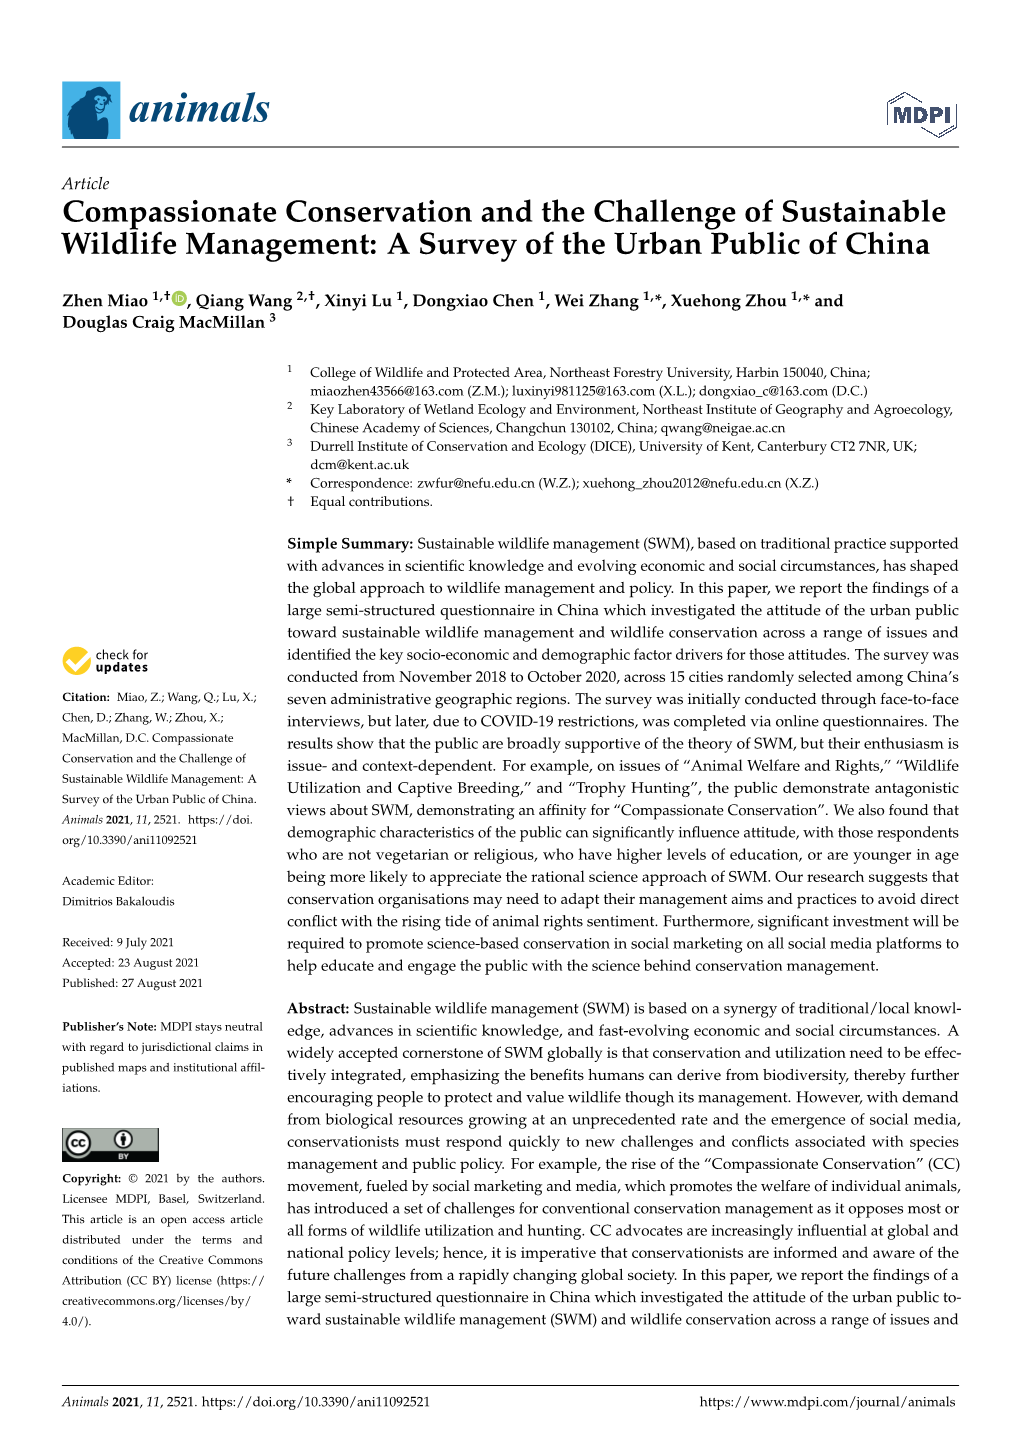 Compassionate Conservation and the Challenge of Sustainable Wildlife Management: a Survey of the Urban Public of China